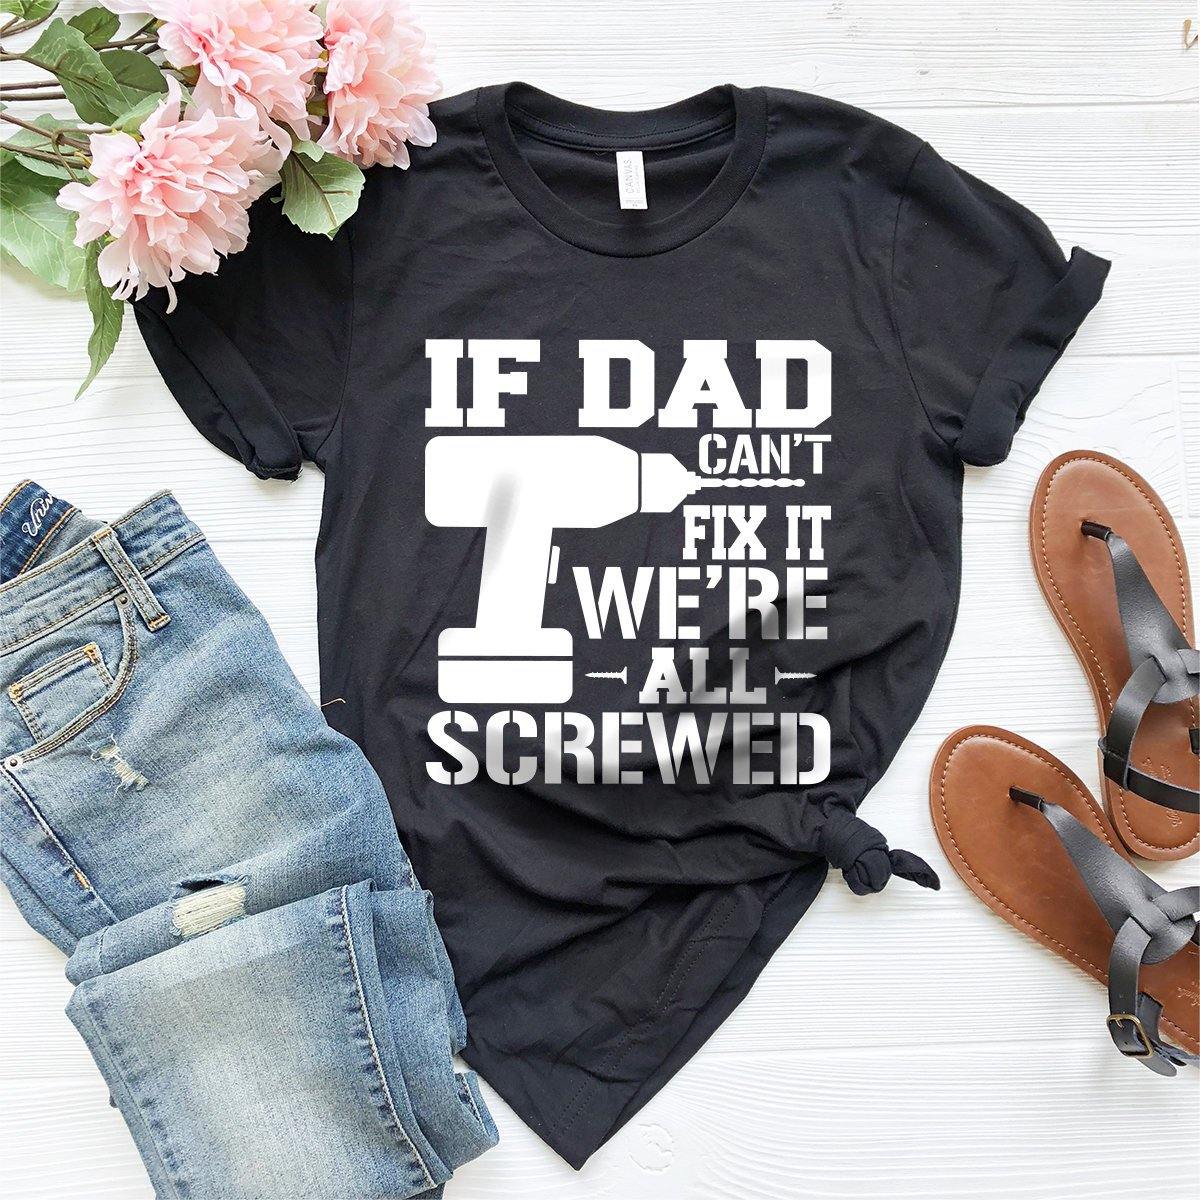 Dad Shirt, Funny Dad Shirt, If Dad Can't Fix It We're All Screwed Shirt, Dad Gift, Gift For Dad, Father Shirt, Father Gift, Father's Day Tee - Fastdeliverytees.com